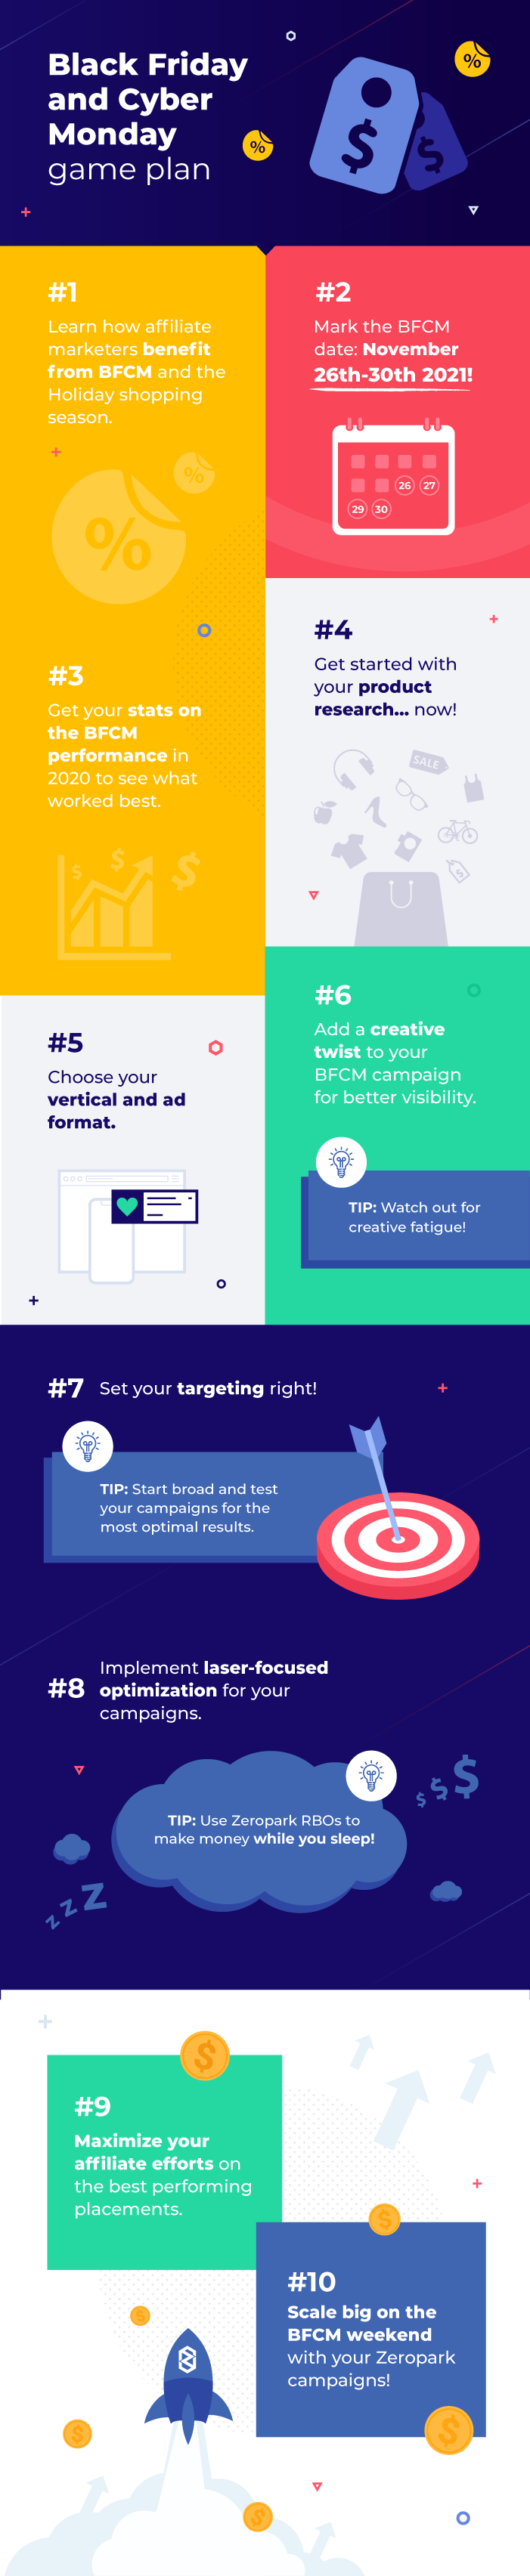 Zeropark Blog Black Friday Cyber Monday Strategy for Affiliate Marketers Infographic